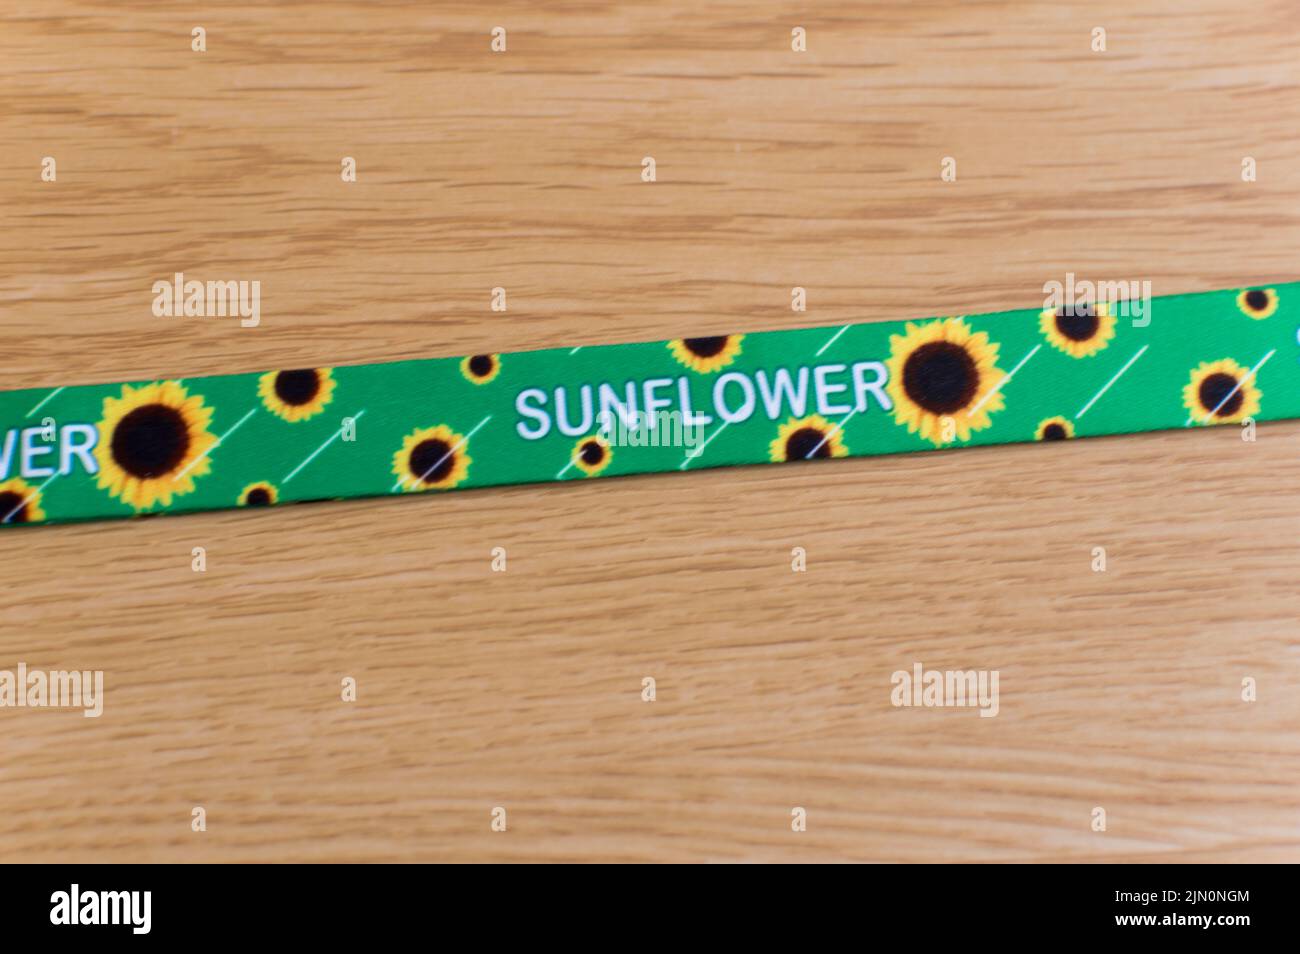 Sunflower lanyard a symbol of people with hidden or invisible disability Stock Photo